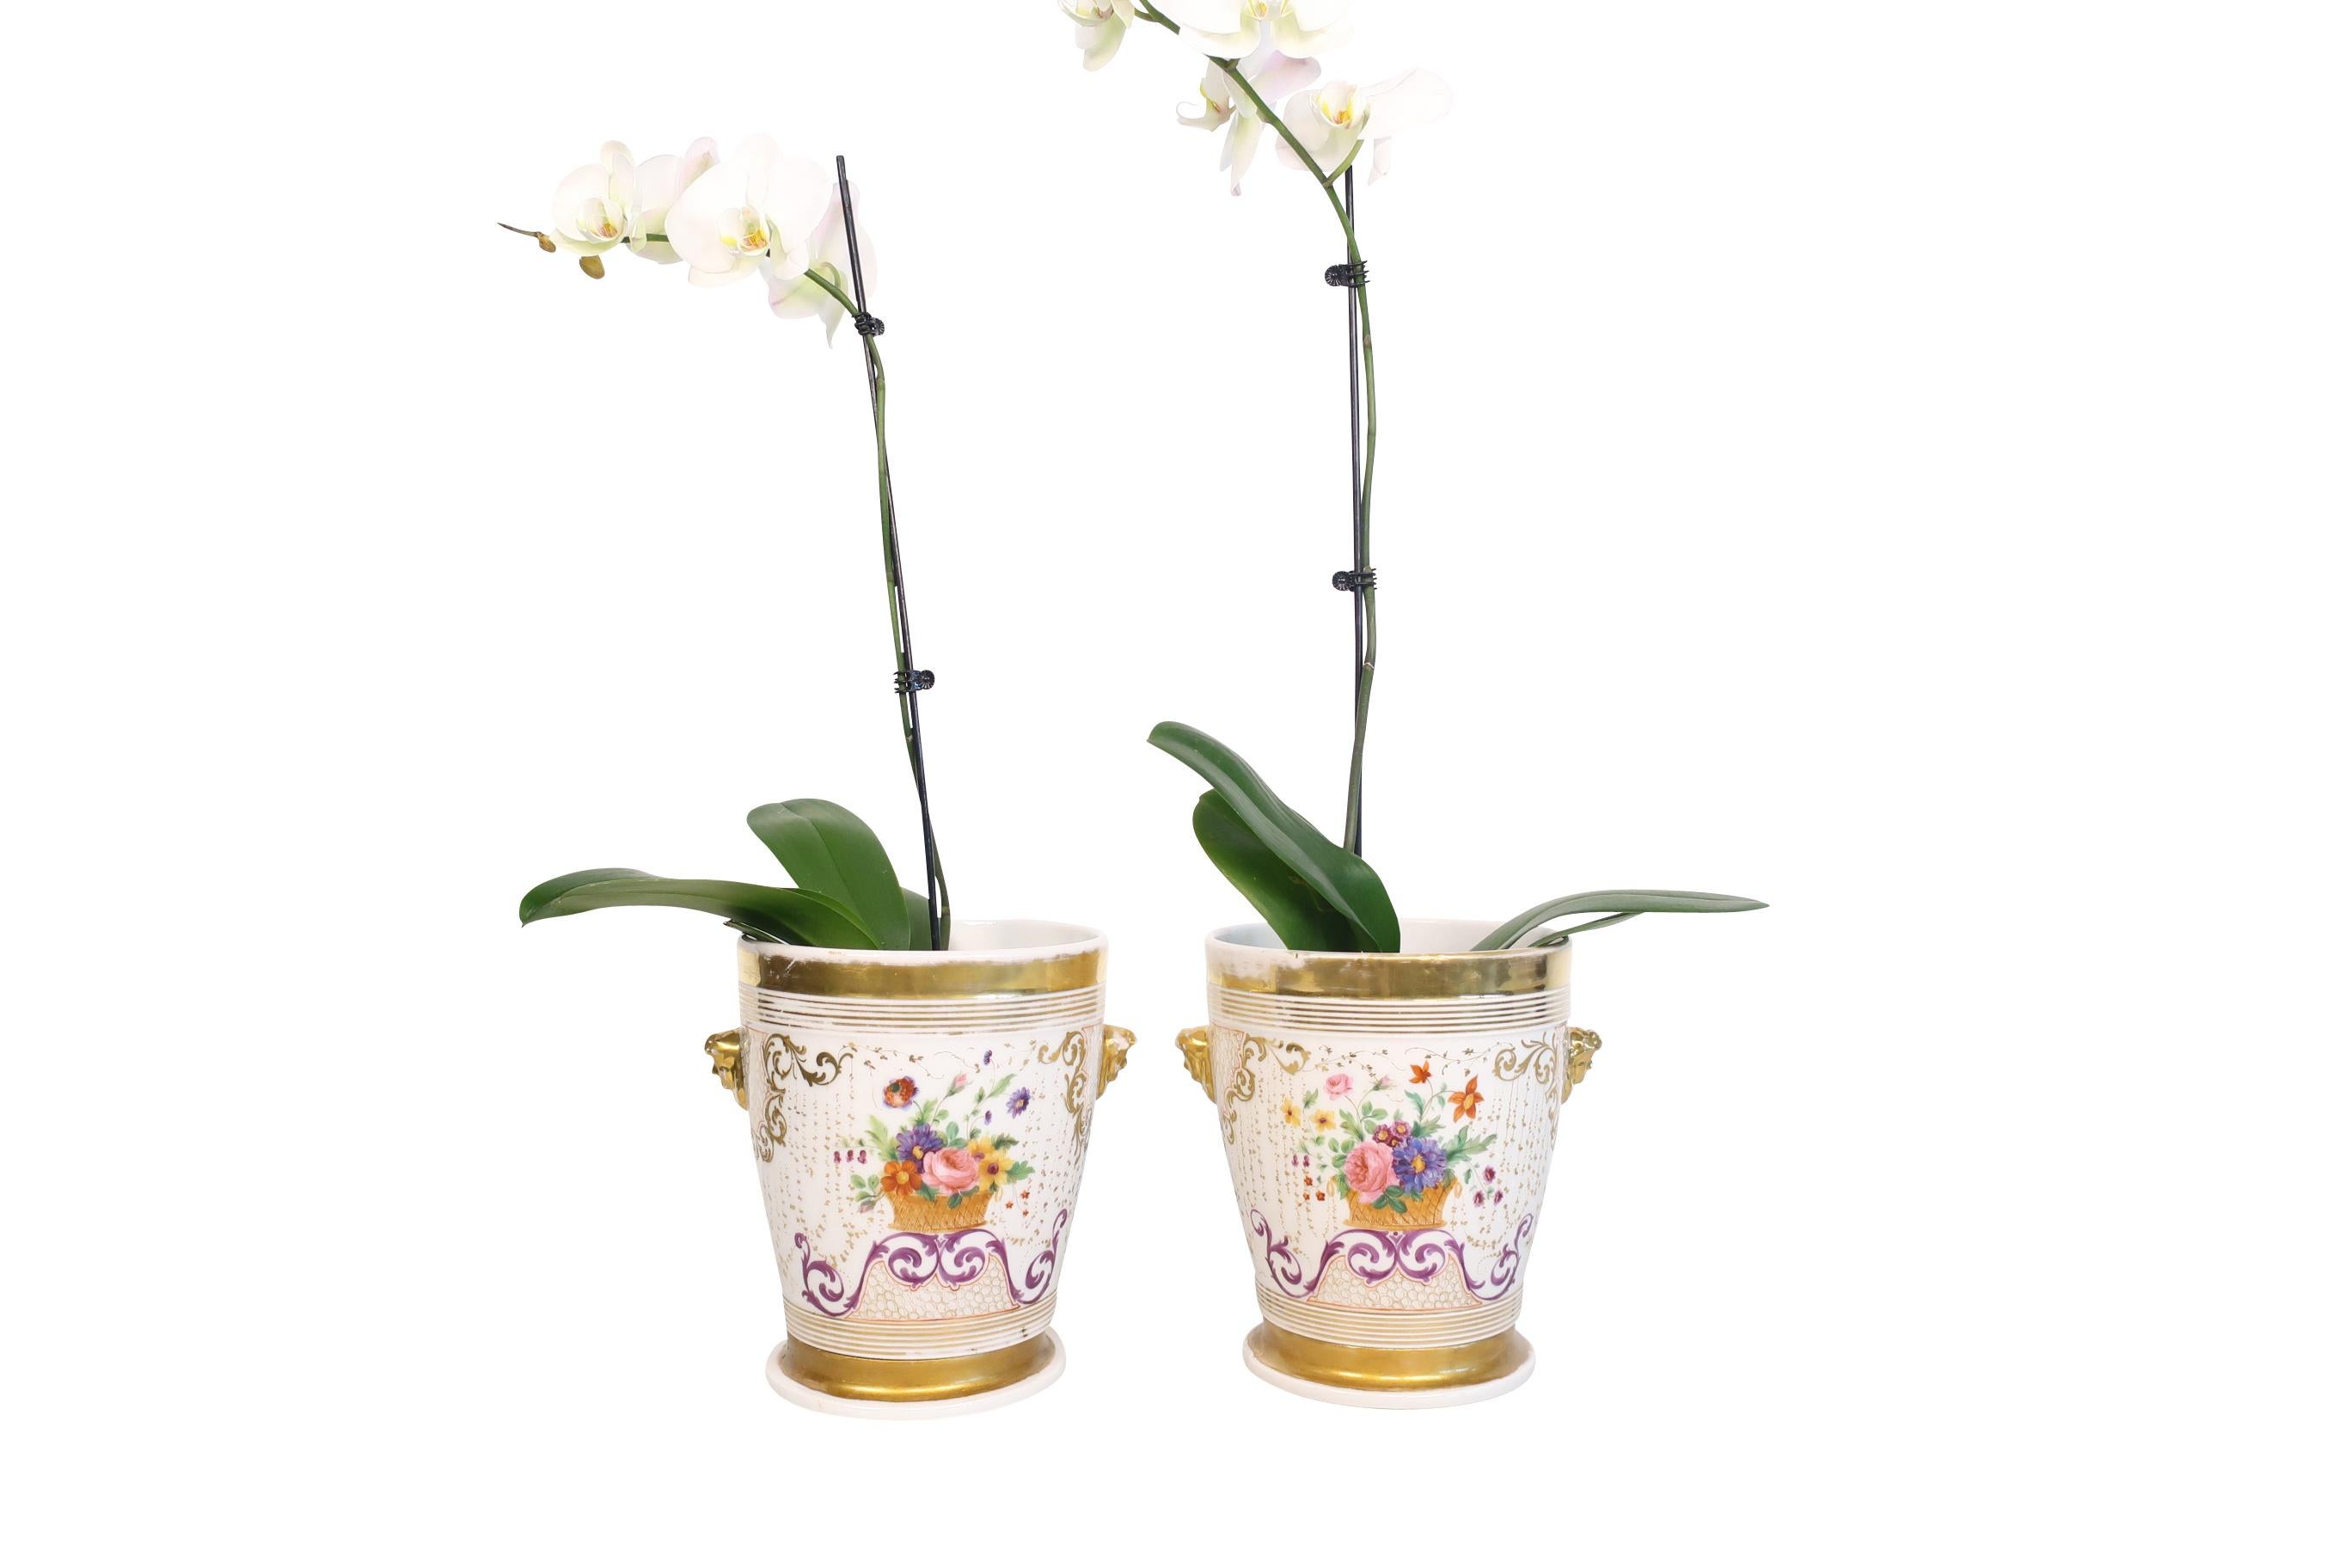 A lovely pair of antique 19th century Porcelain de Paris Wine coolers that also can be used as jardinieres. They are perfect for orchids. The wine coolers are seated on small porcelain stands and have lion mask decoration in gilt on both sides for